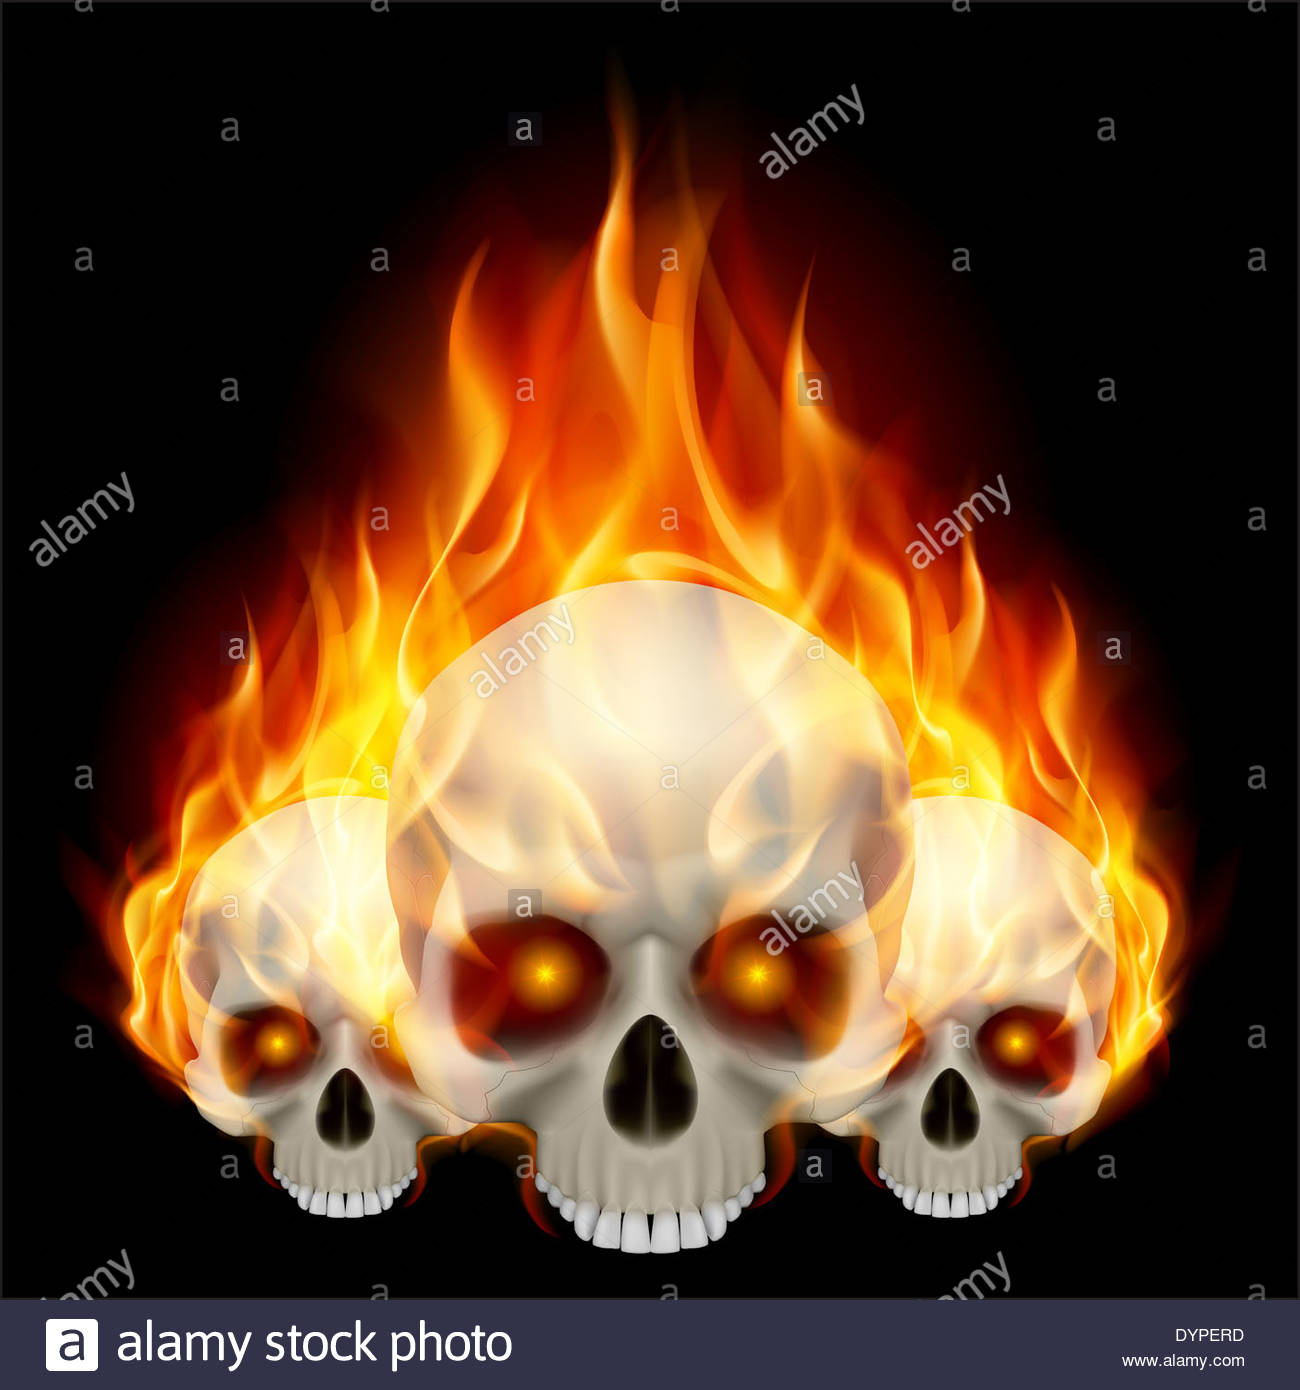 Three Flaming Skulls With Fiery Eyes On Black Background Stock